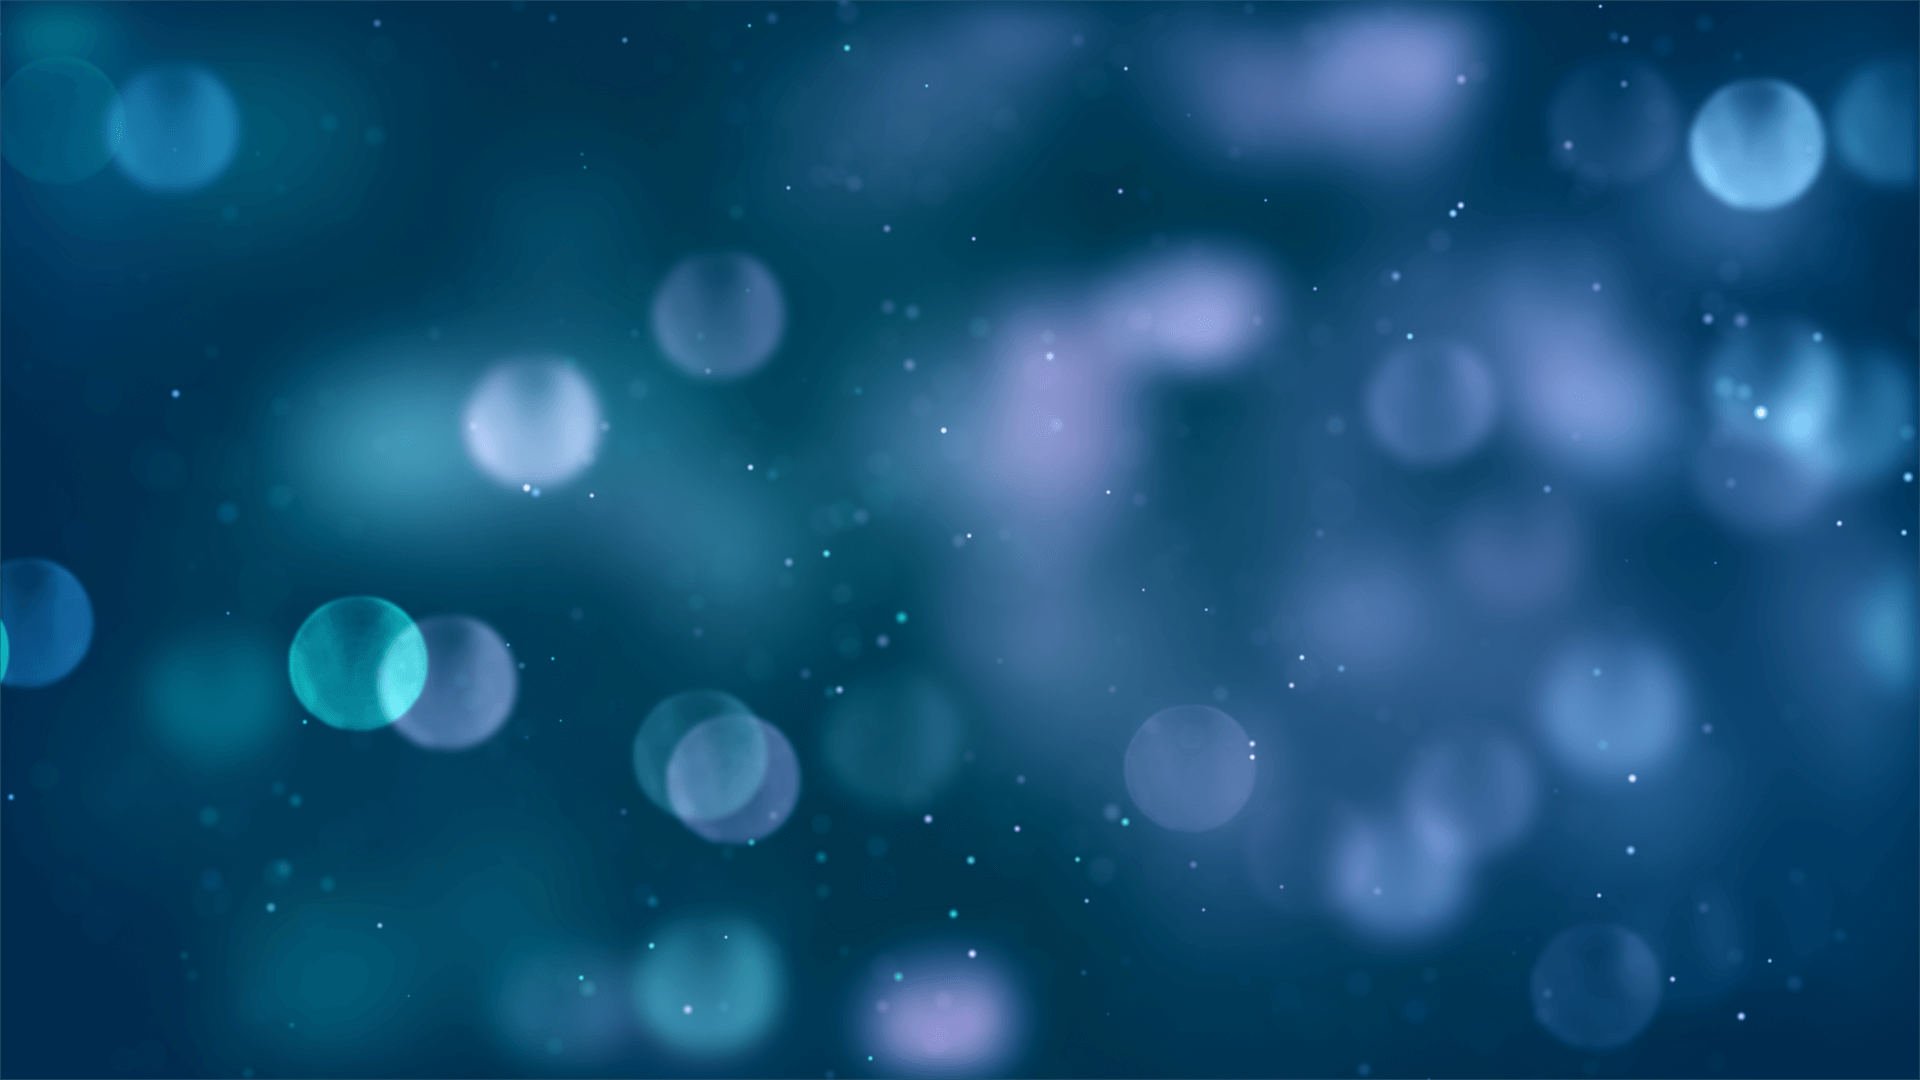 A background image of blurred blue and purple light halos.